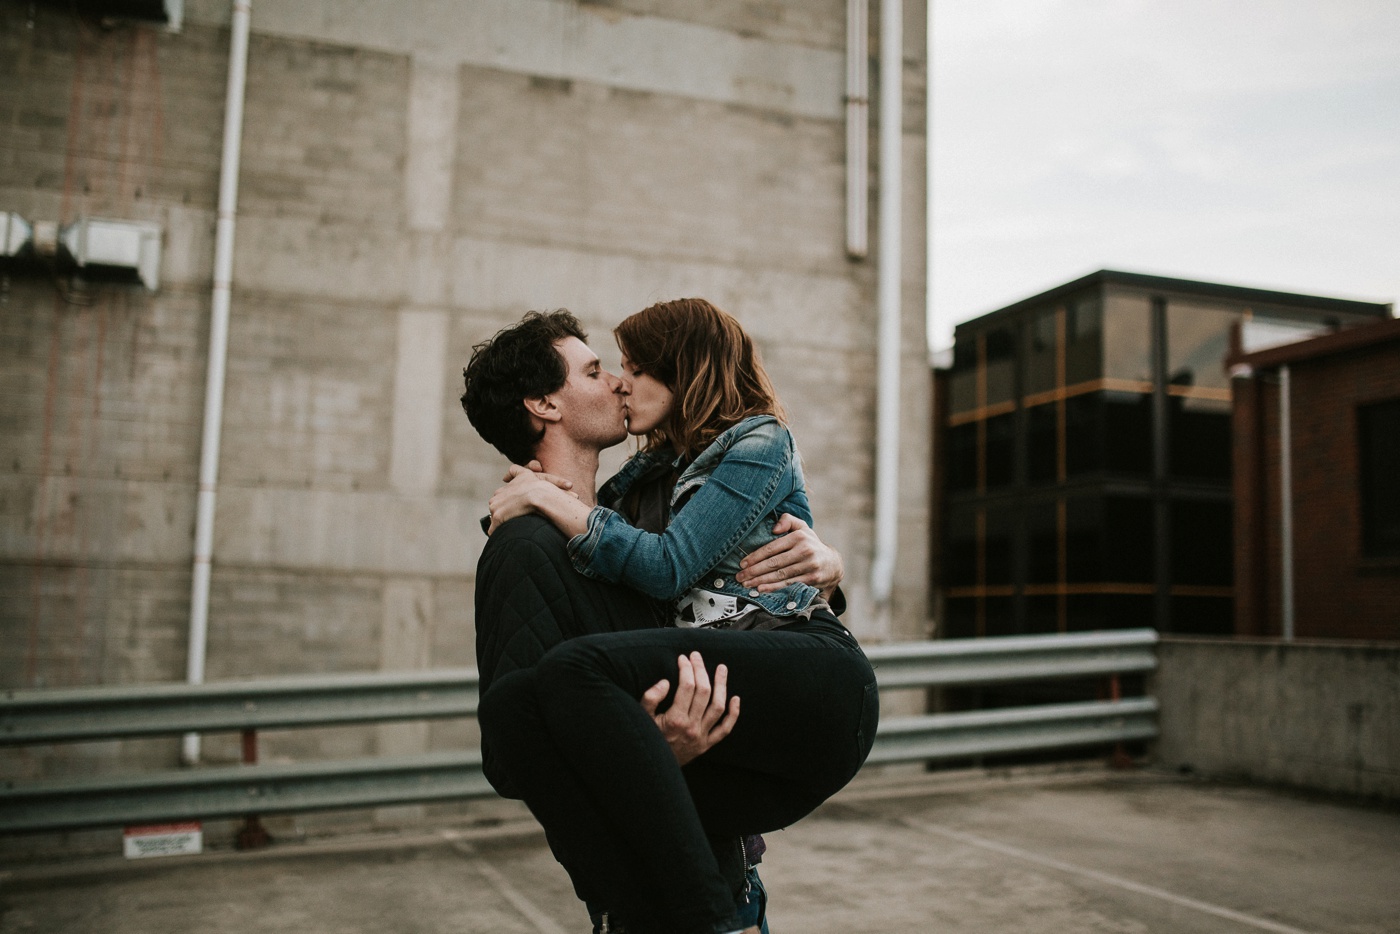 heli-alex_melbourne-fun-candid-gritty-relaxed-city-urban-couples-engagement-session_melbourne-wedding-photography_27